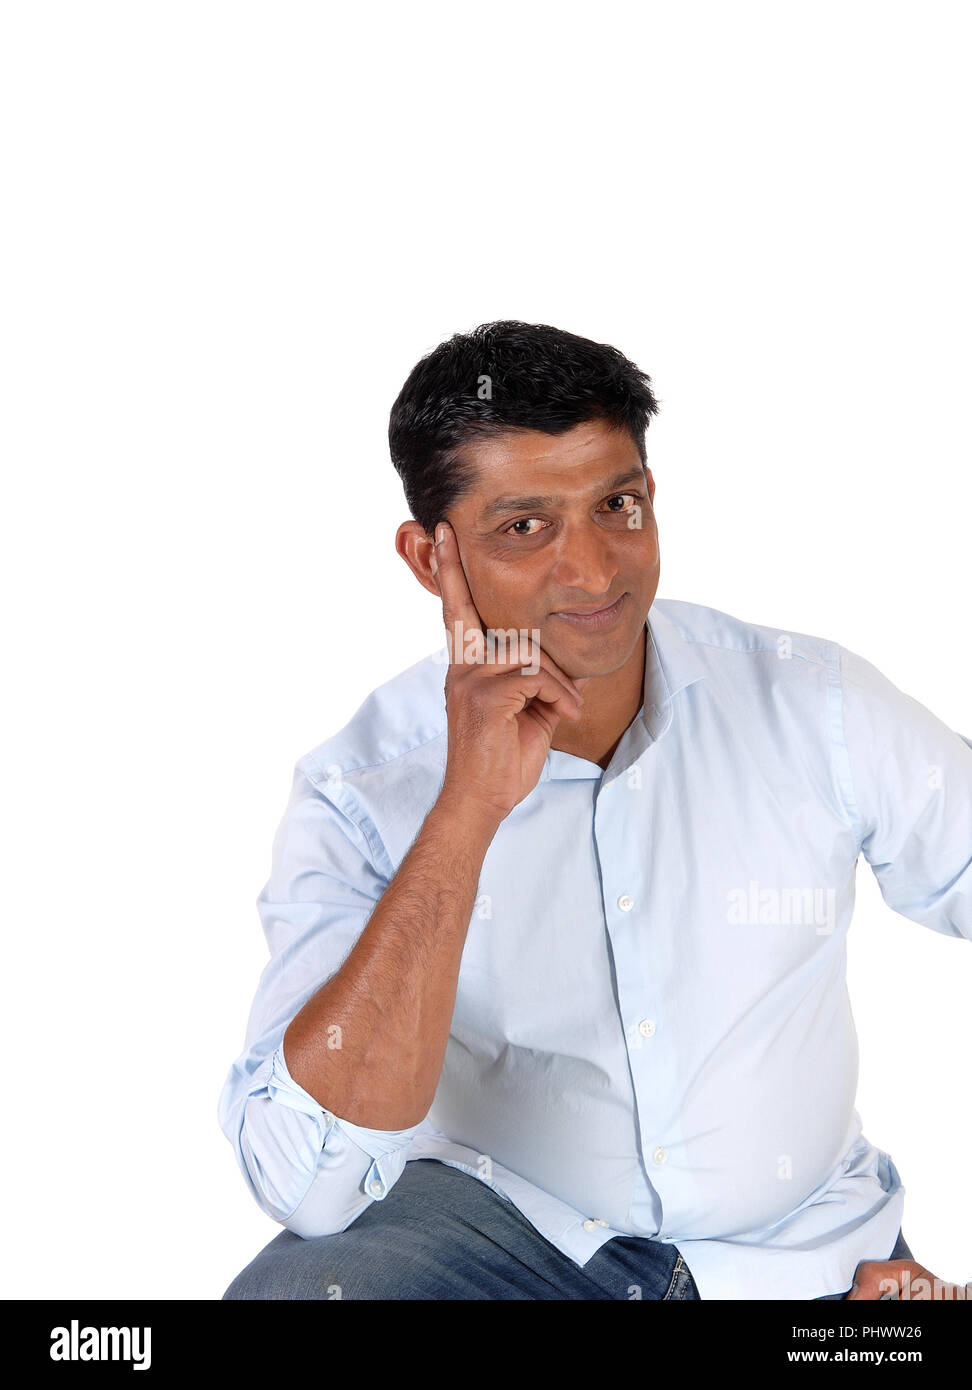 Handsome man thinking with hand on face Stock Photo